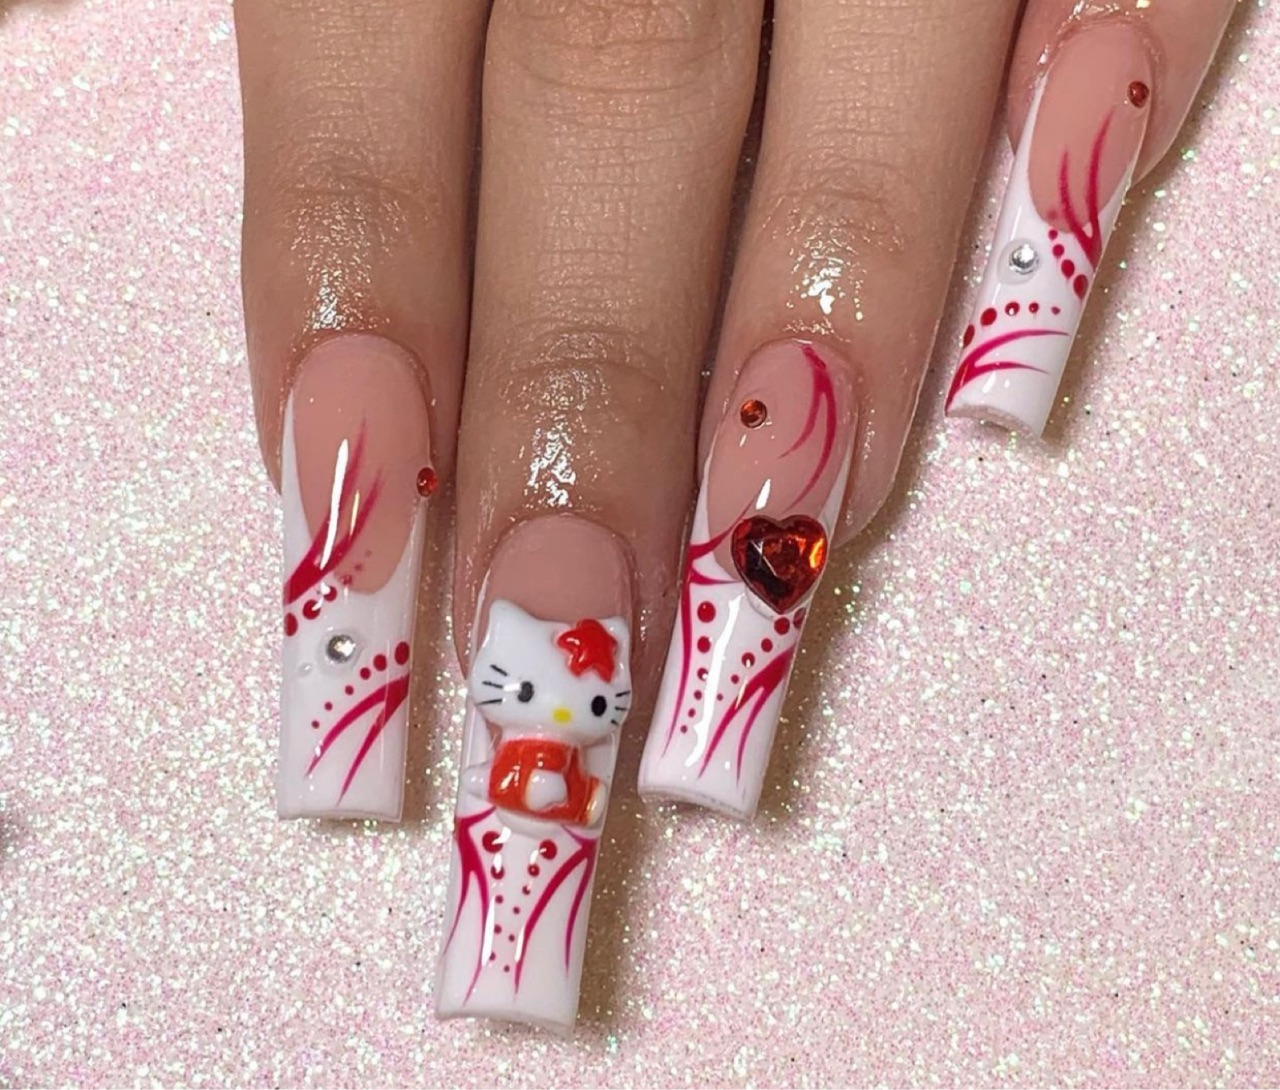 Hello Kitty nail art design with red details on long nails